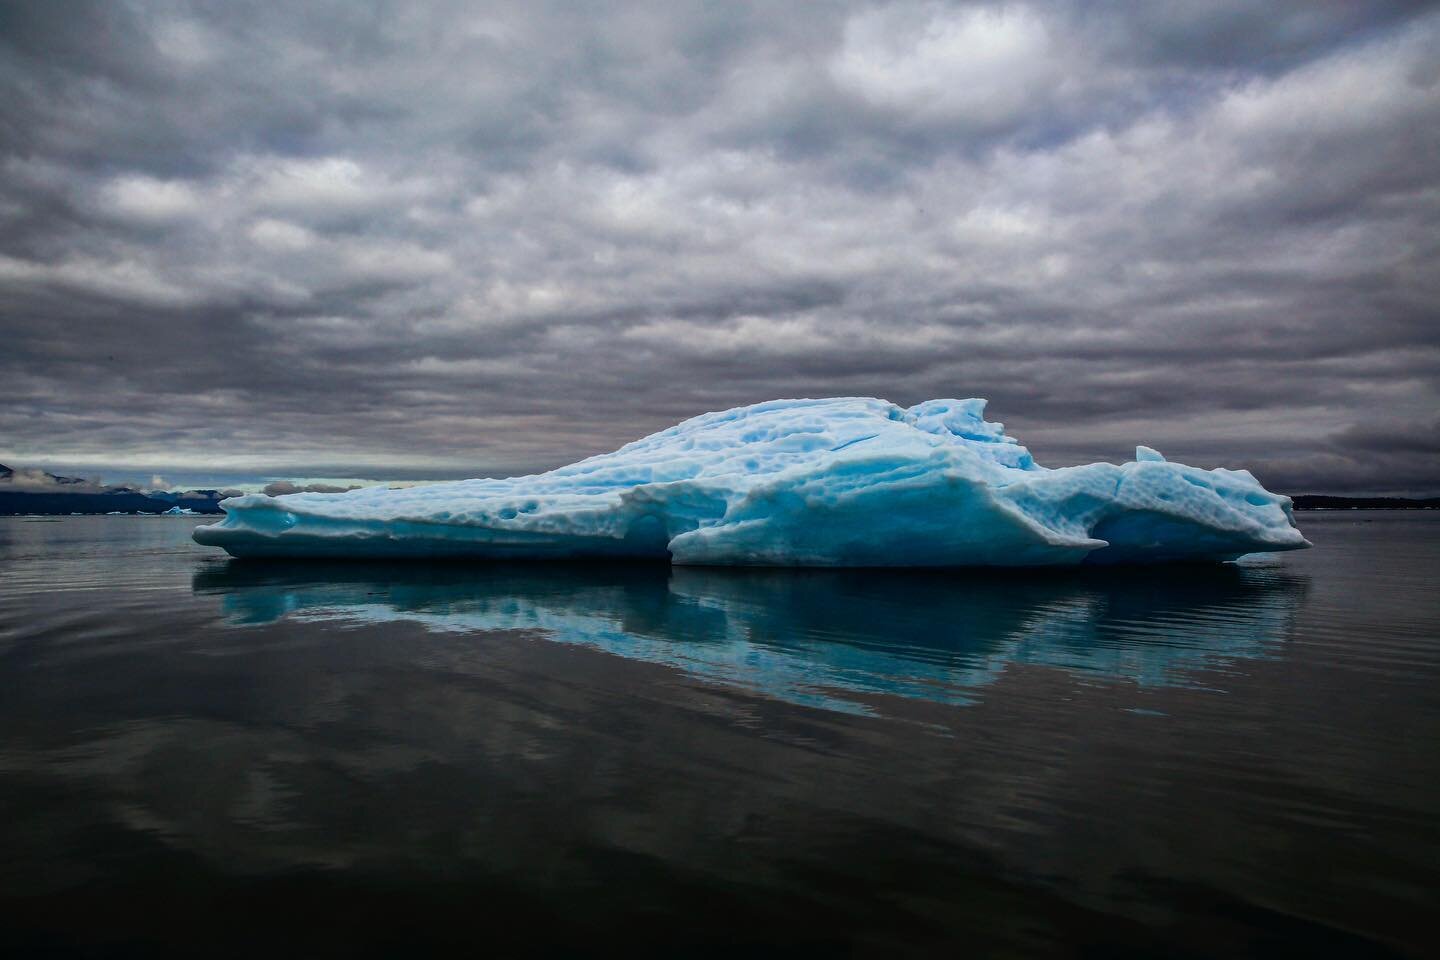 &lsquo;Iceberg II&rsquo; fine art photography available to buy. There is something very magical about glacial ice. This iceberg was sleeker than the first and it was something about its shape that captured me. It was a sylph like sculpture floating i